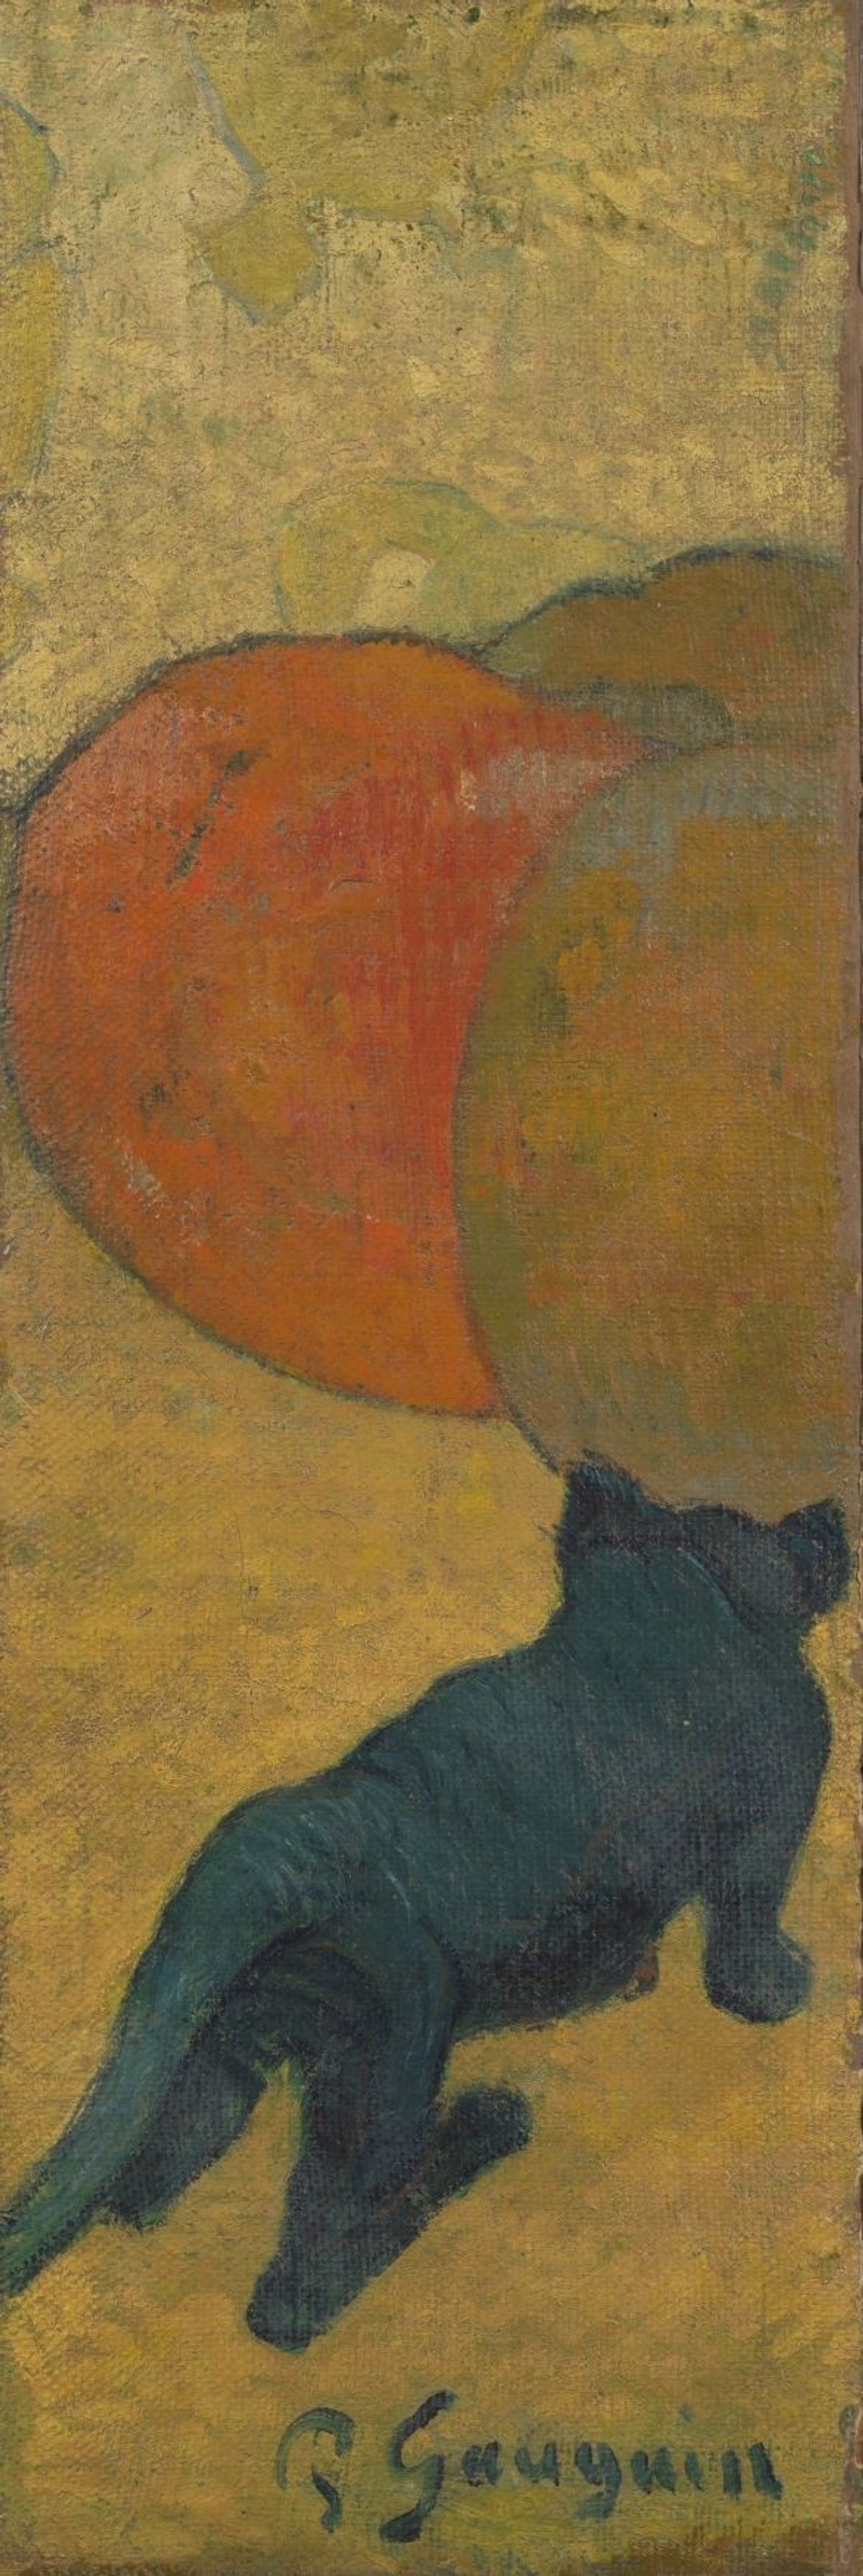 Paul Gauguin’s The Little Cat (November 1888)

Credit: Private collection, France on loan to the Van Gogh Museum, Amsterdam
